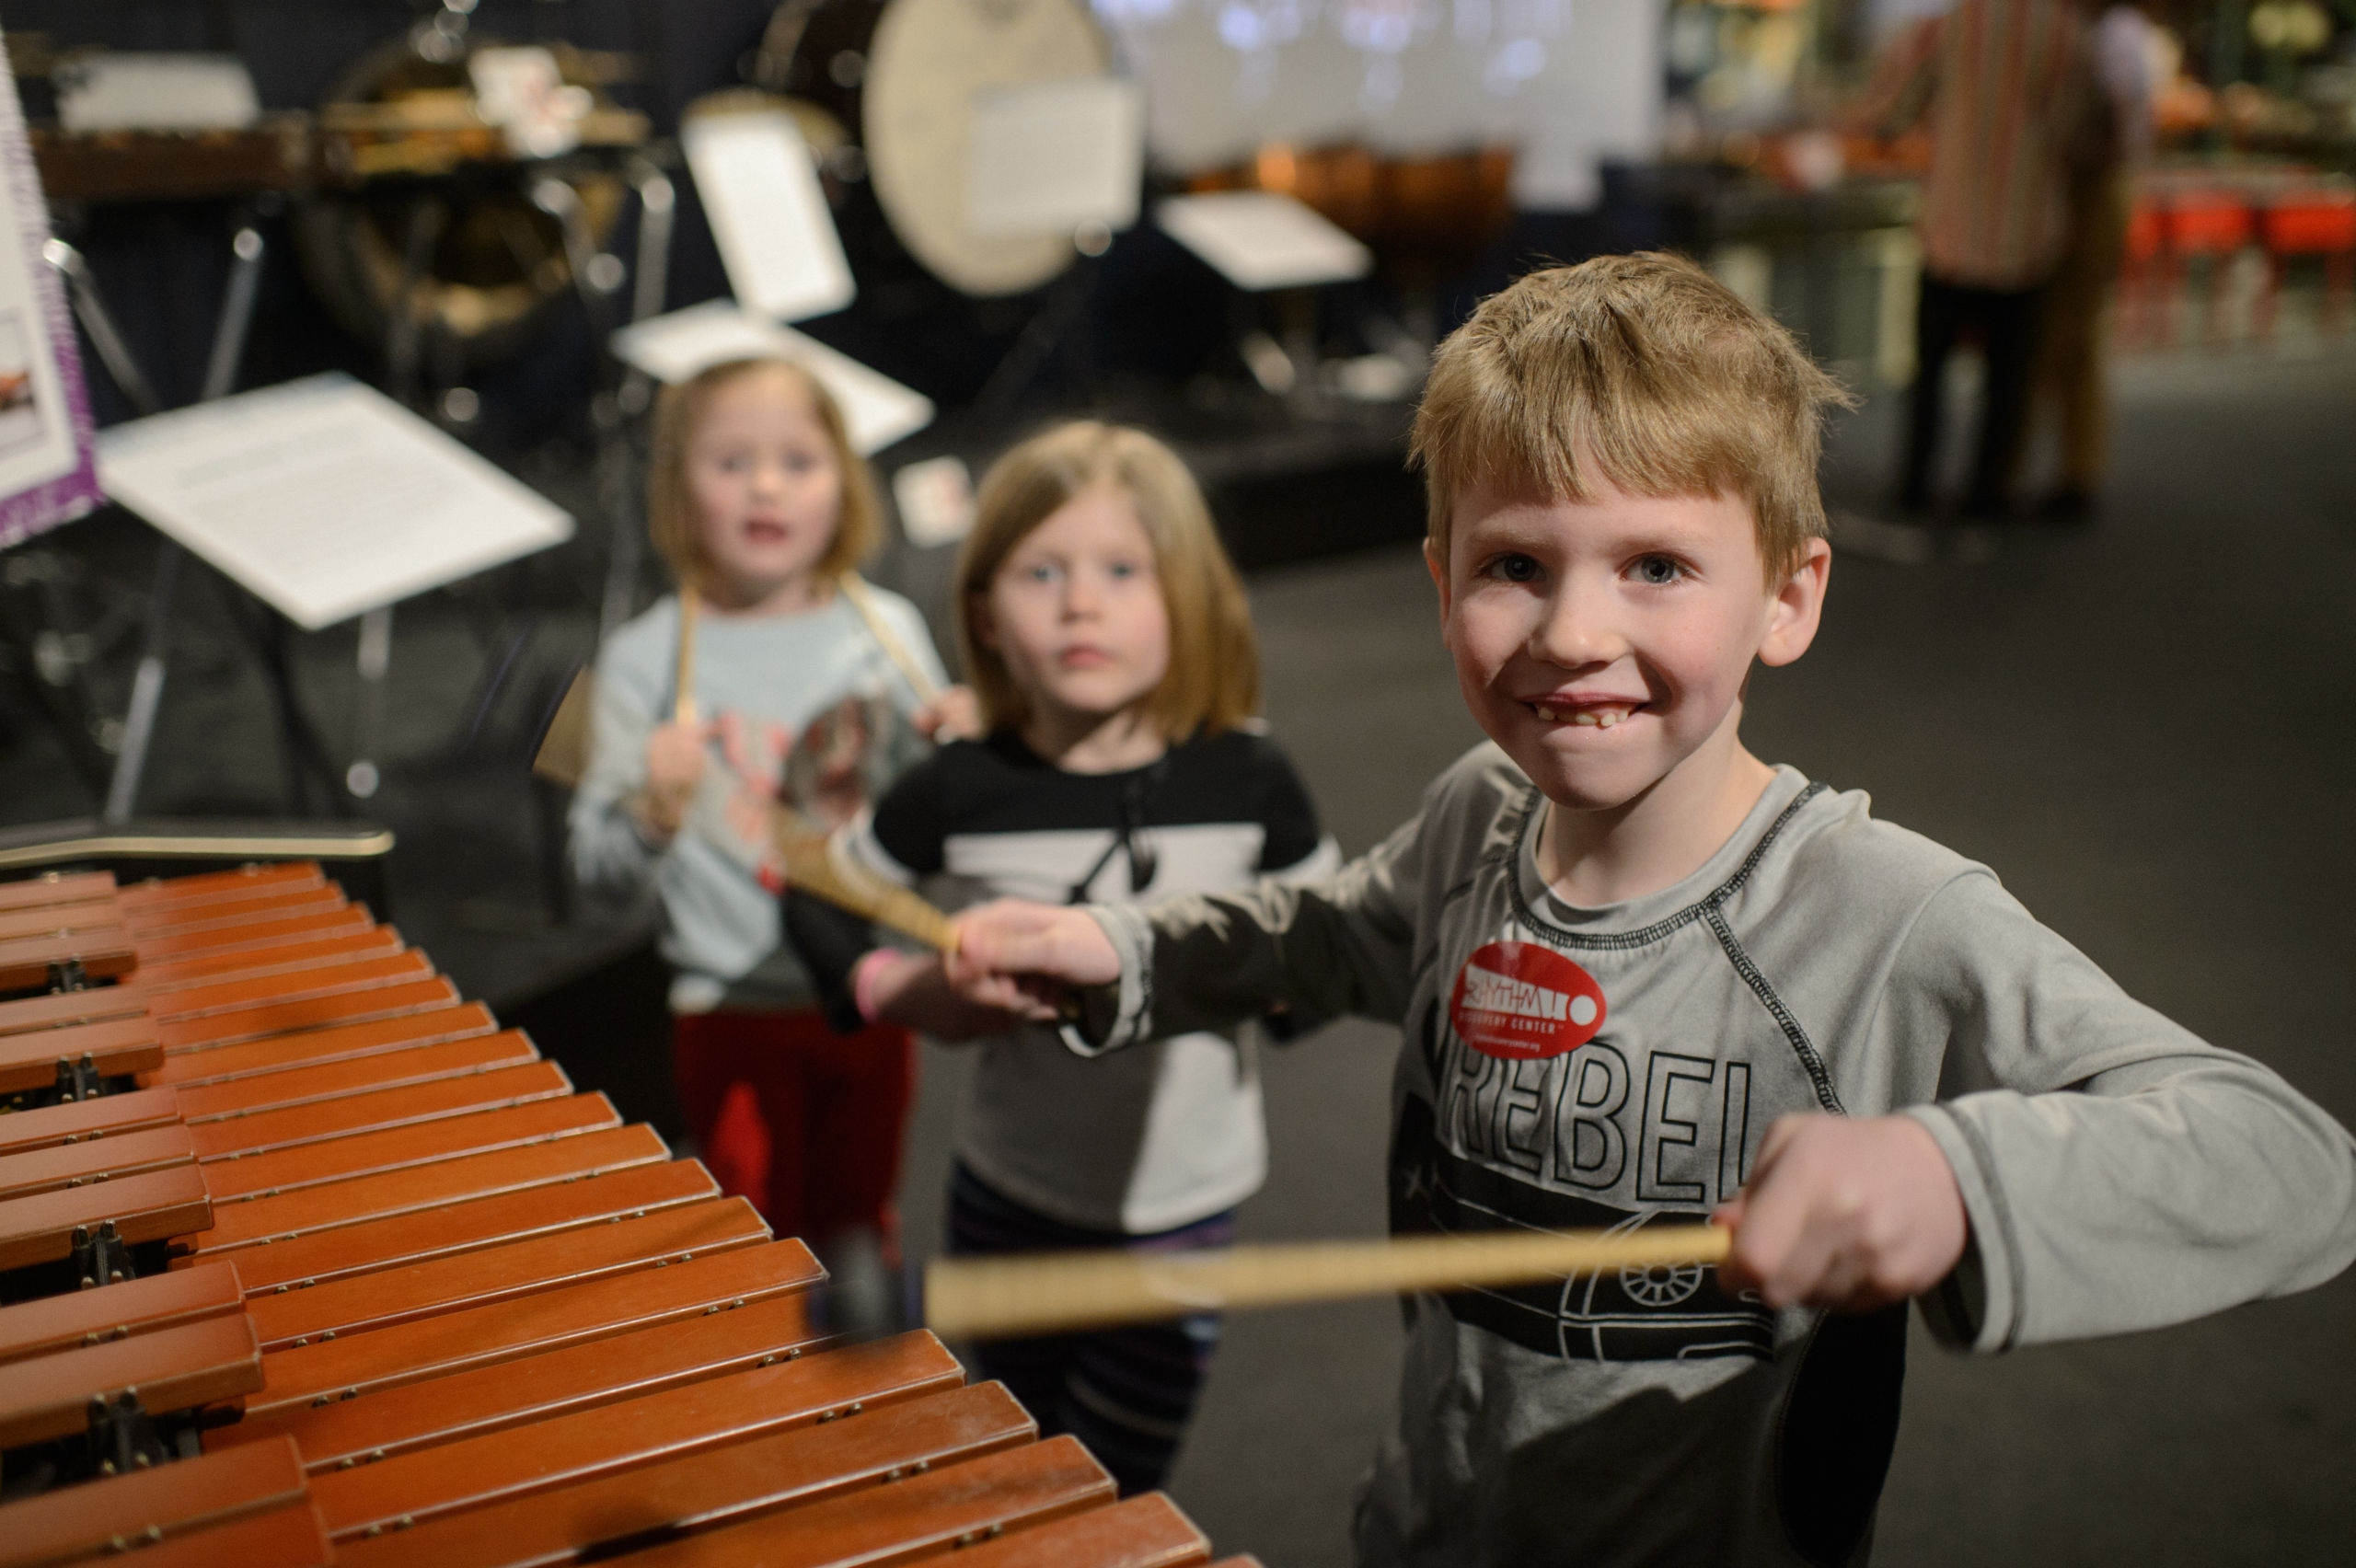 Kids at the Rhythm Discovery Center